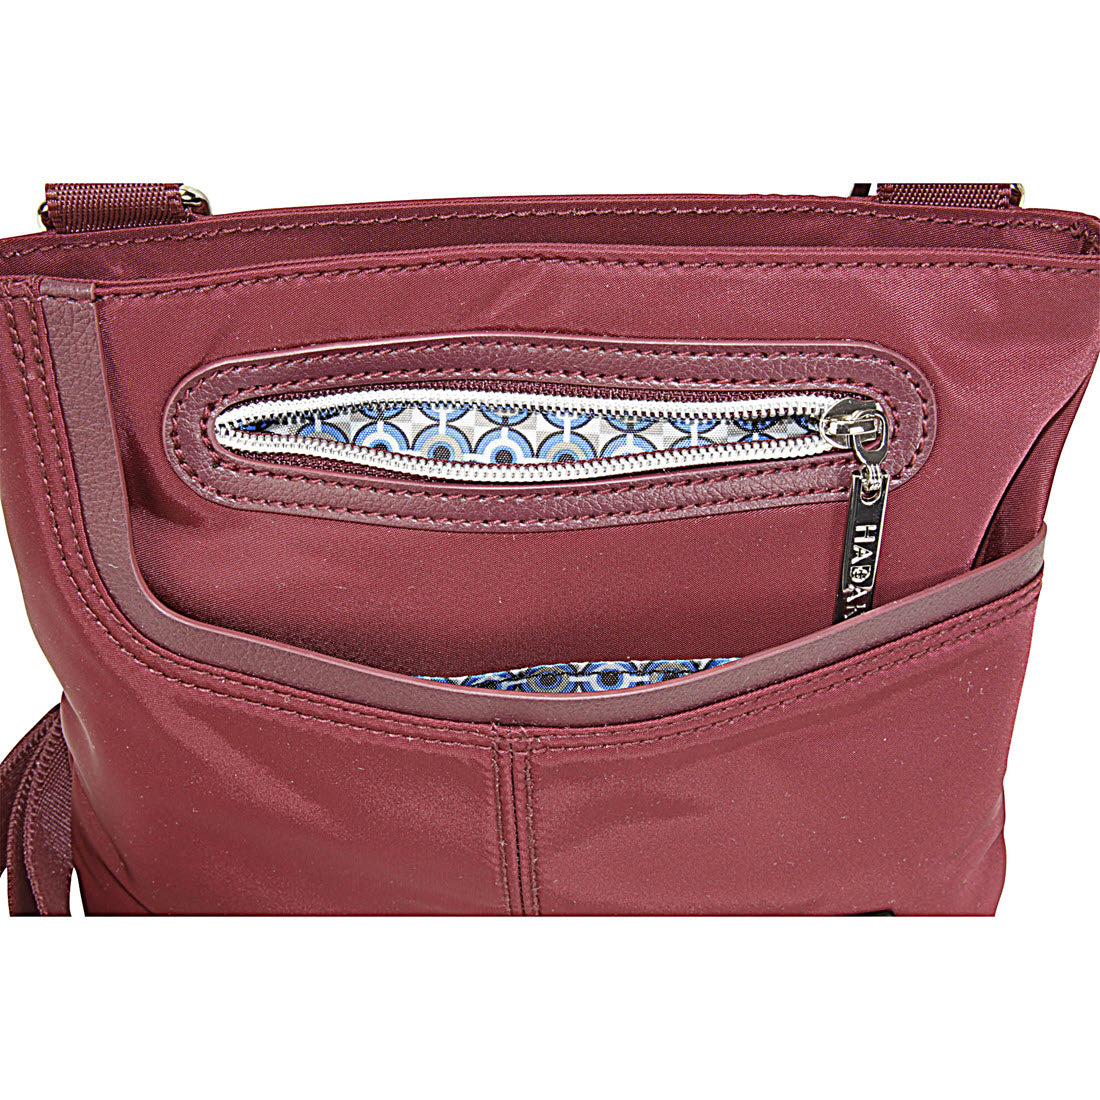 Close-up of a maroon Hadaki Mini Me Crossbody Wine with a zippered front pocket showing a patterned fabric lining.